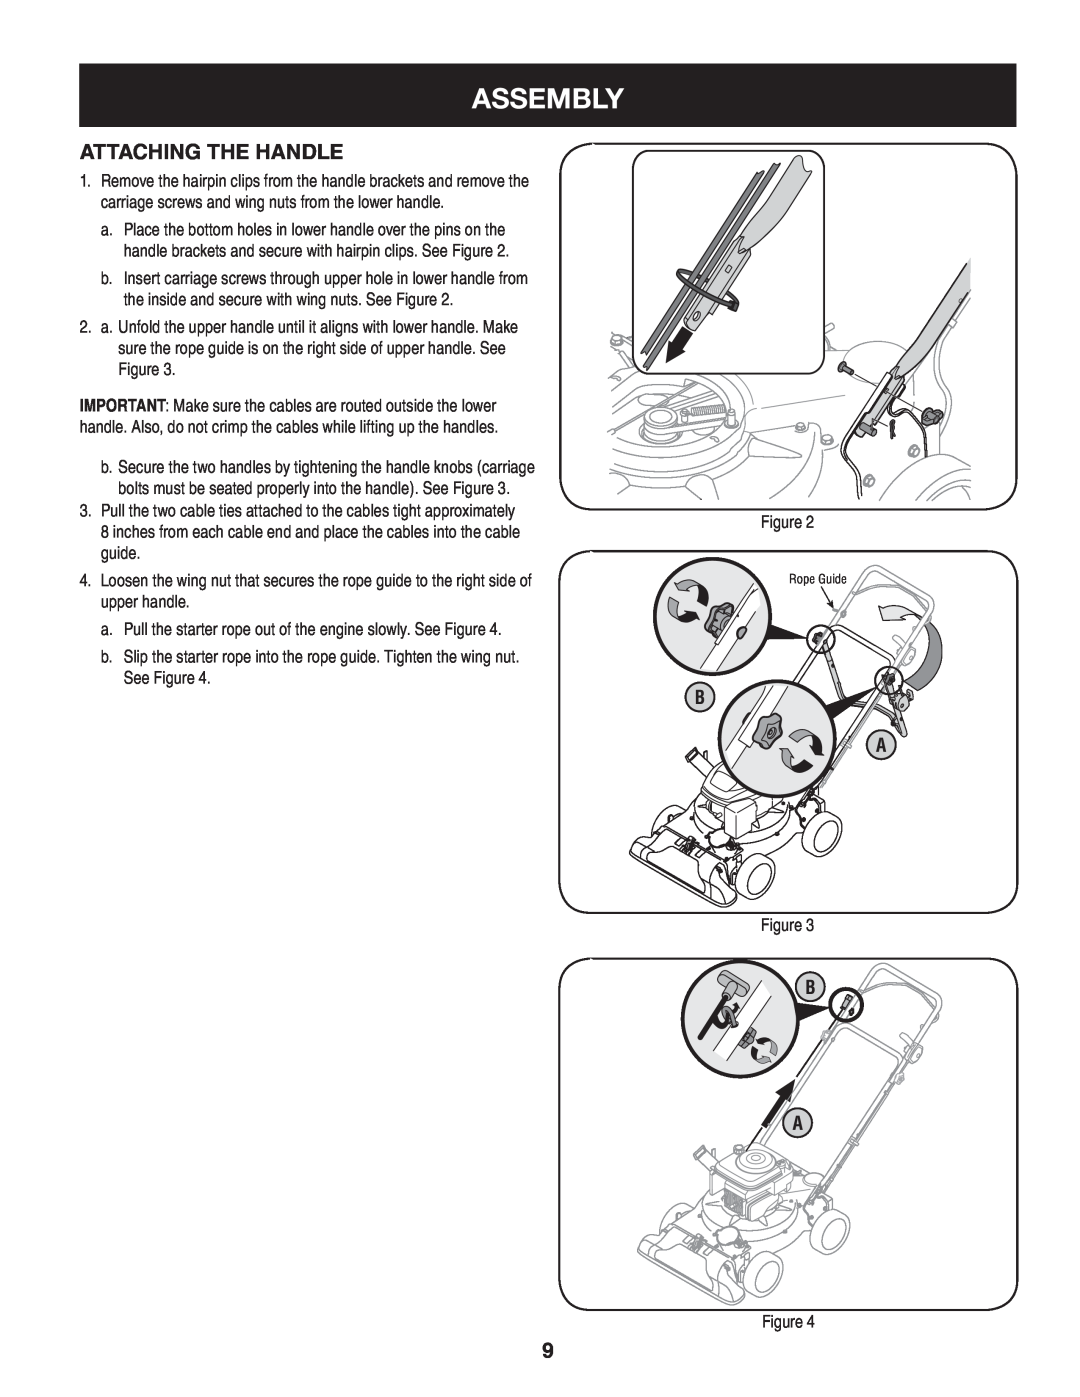 Craftsman 247.77013.0 manual Assembly, Attaching The Handle 